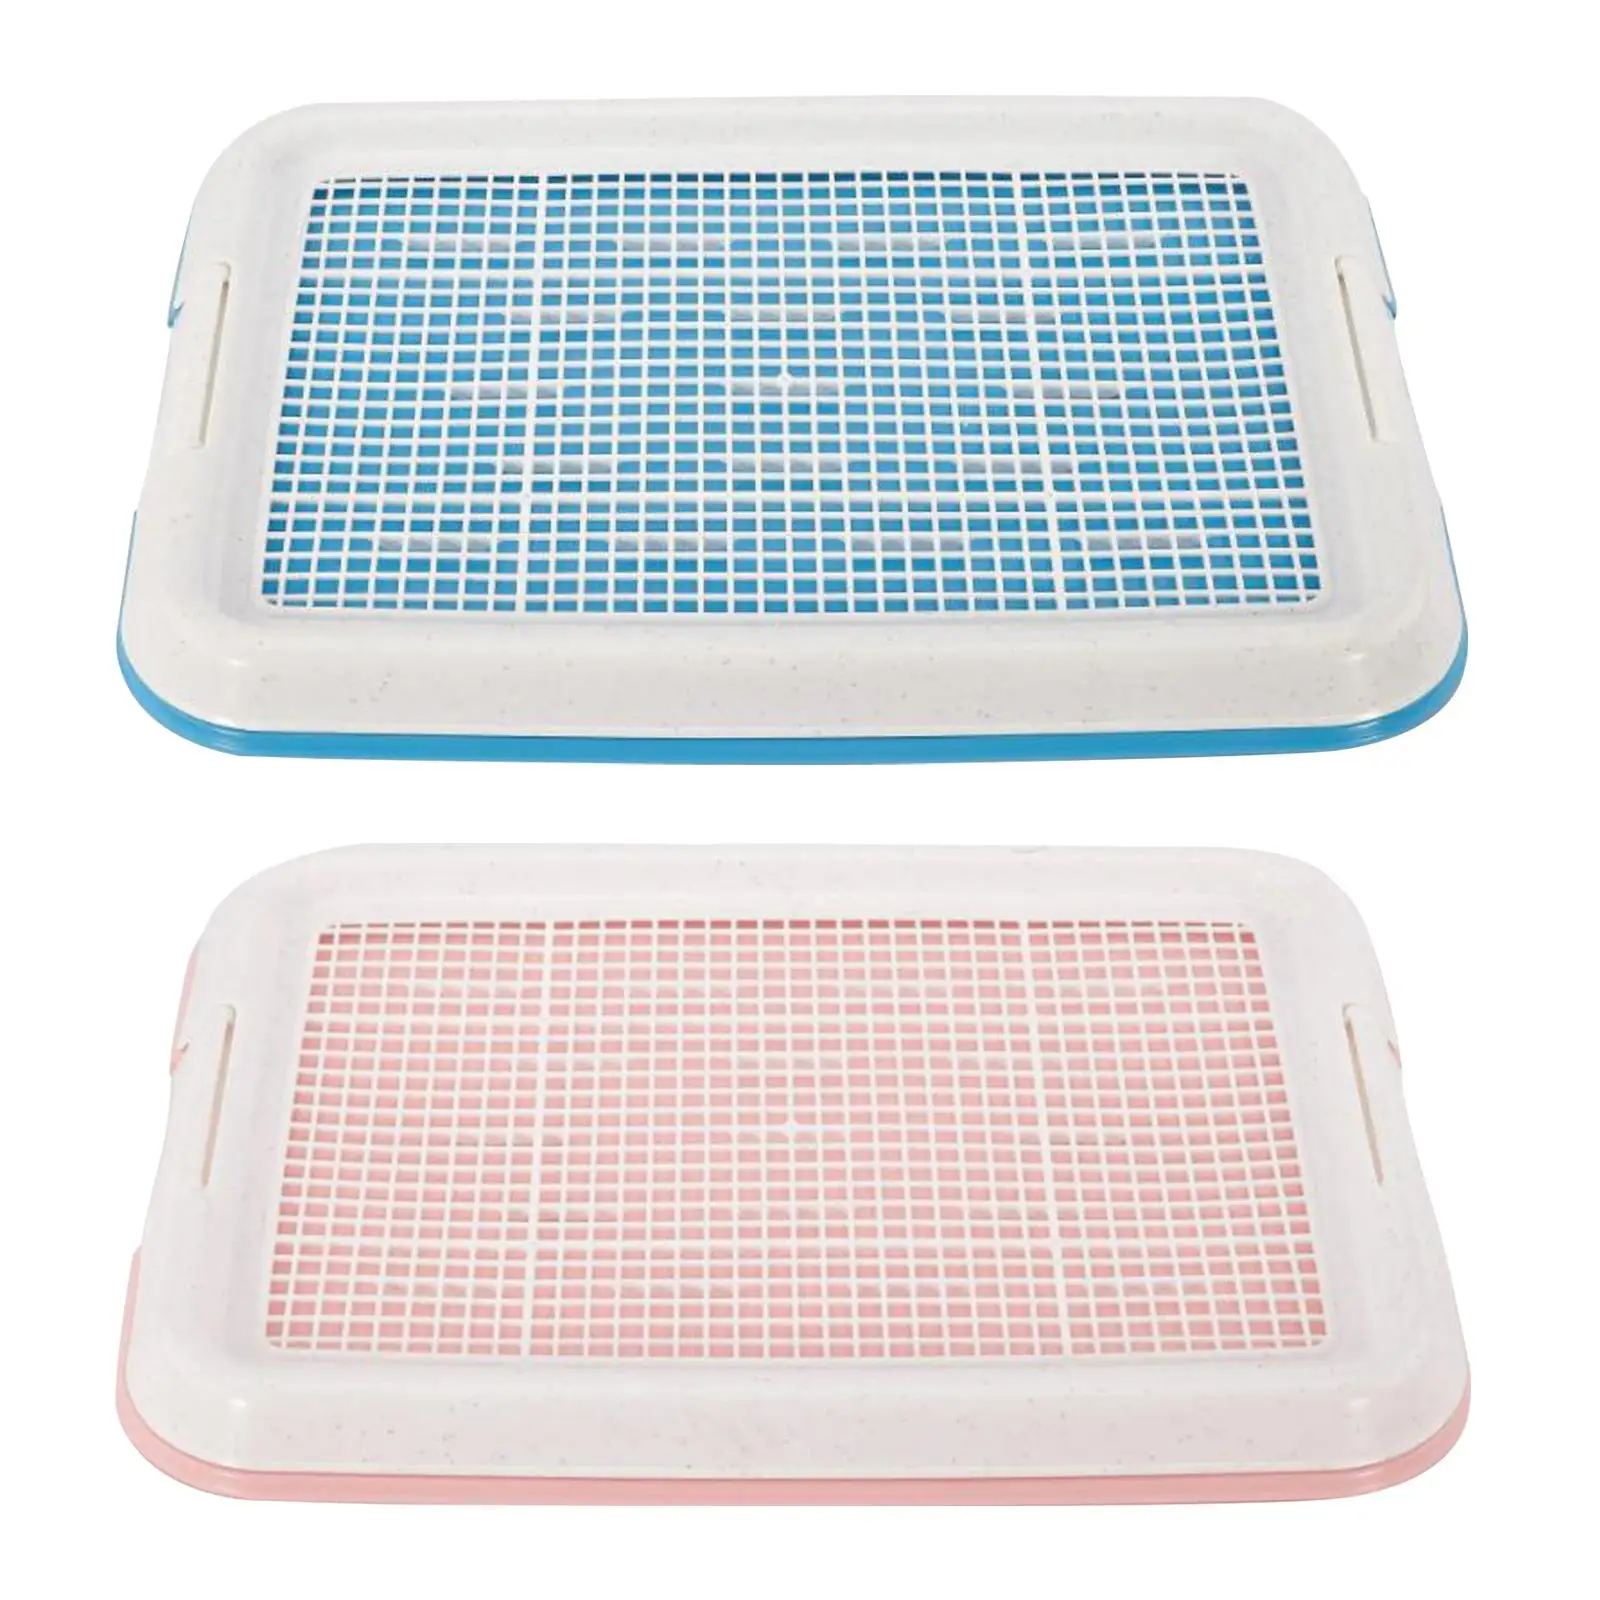 Dog Potty Toilet Training Tray Easy to Clean Removable Dog Potty Tray Mesh Training Tray Dog Litter Box for Small Size Dogs